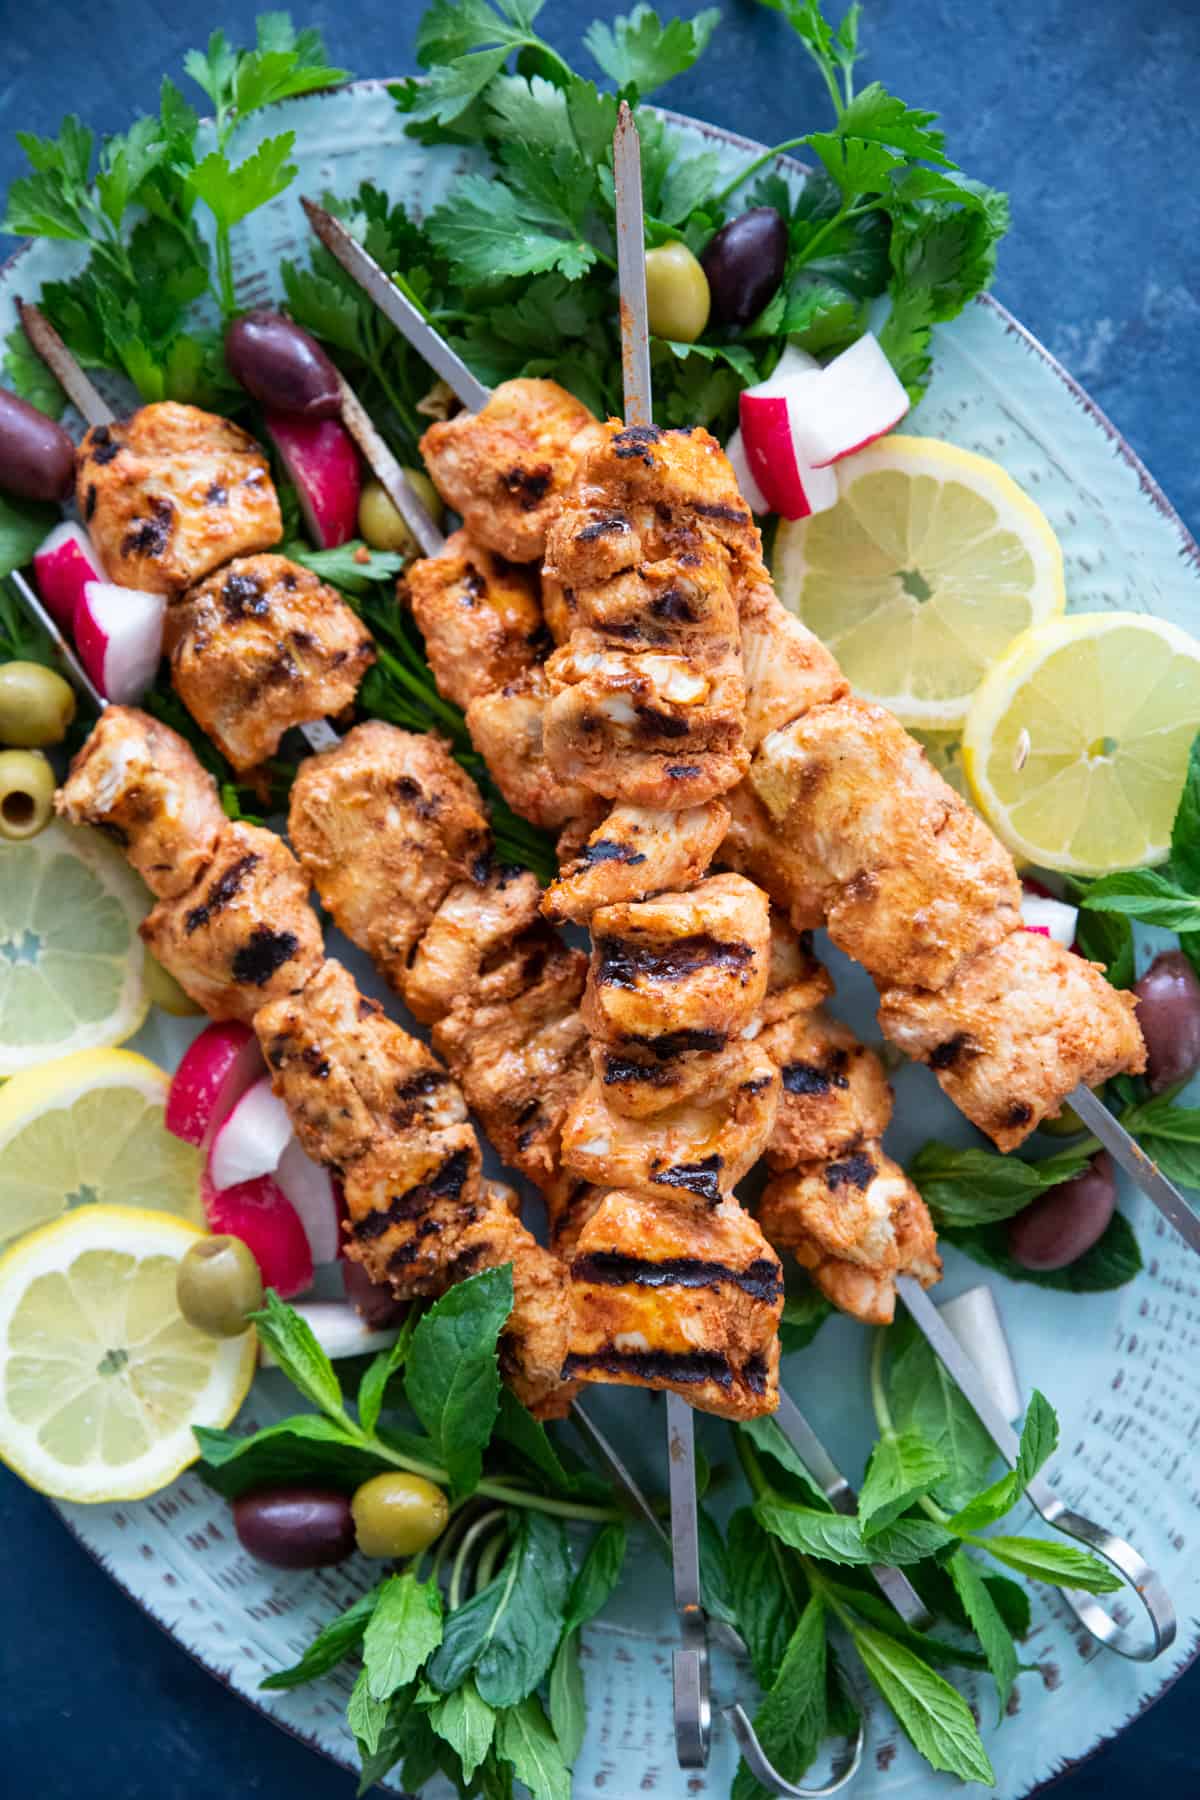 Looking for an easy grilled chicken recipe? These chicken kabobs are for you! They are tender and packed with a lot of flavor, and would make a great meal with some salad.
